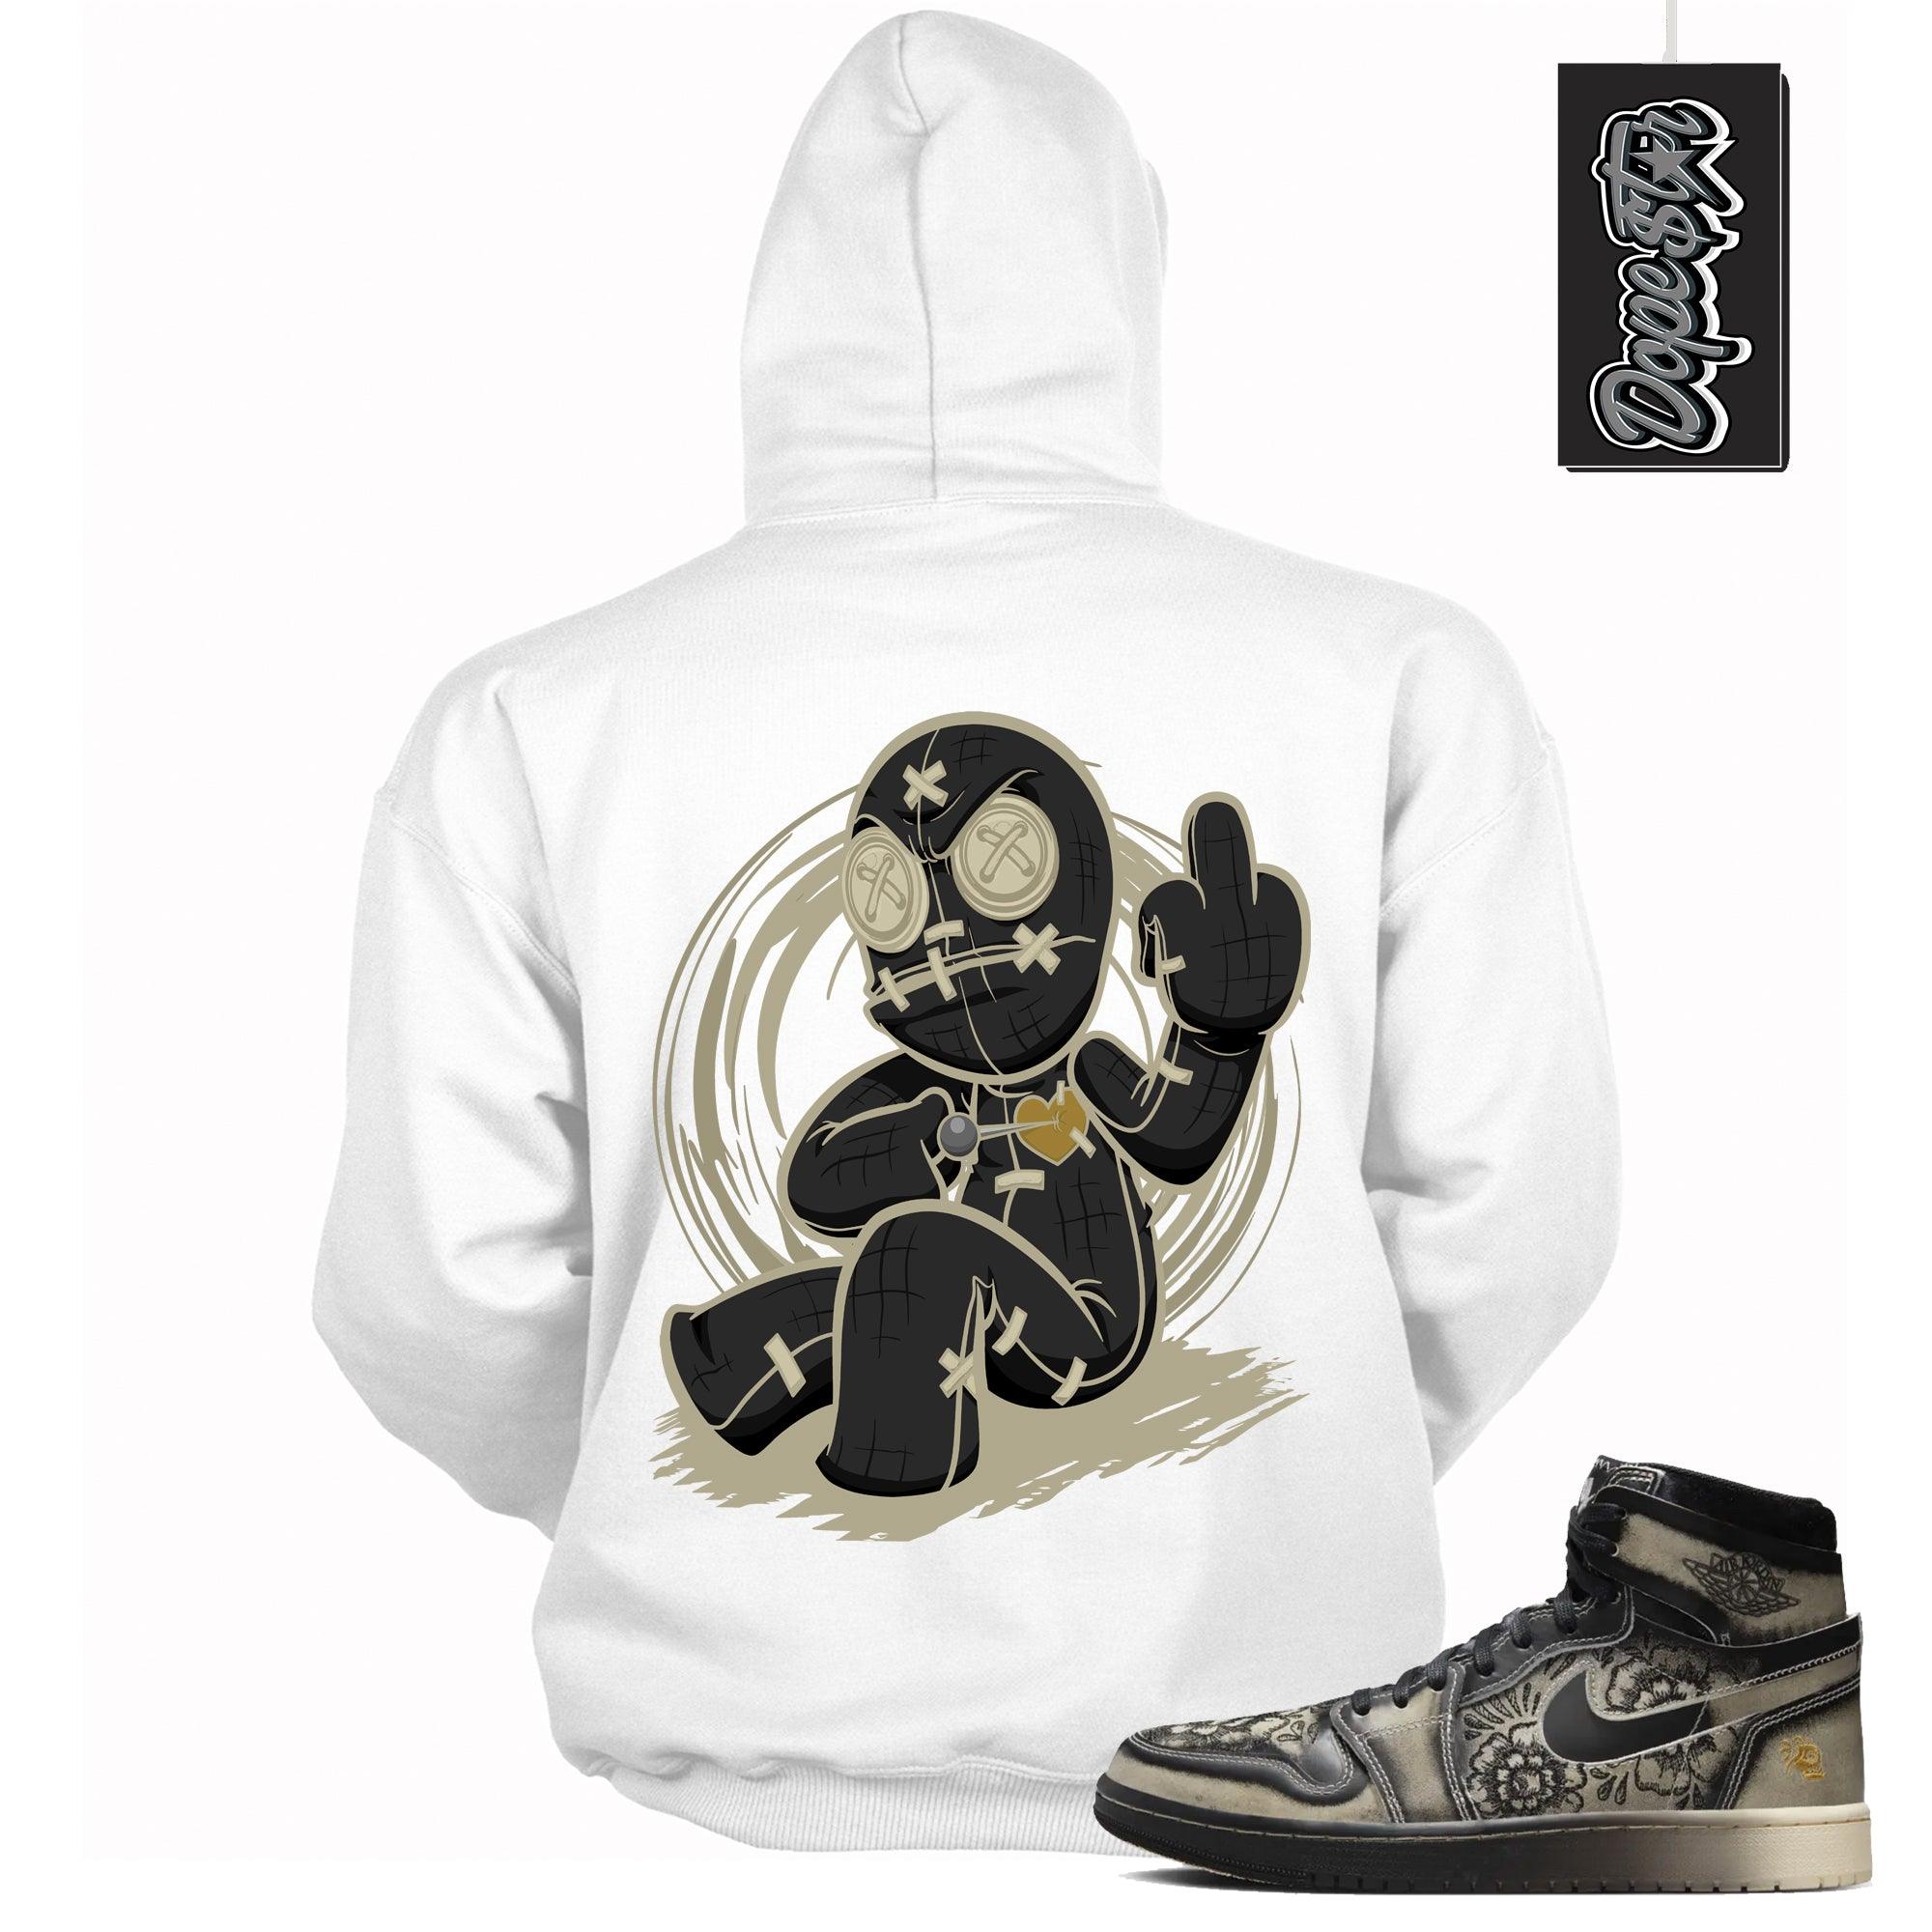 Cool White Graphic Hoodie with “ VooDoo Doll “ print, that perfectly matches Air Jordan 1 High Zoom Comfort 2 Dia de Muertos Black and Pale Ivory sneakers